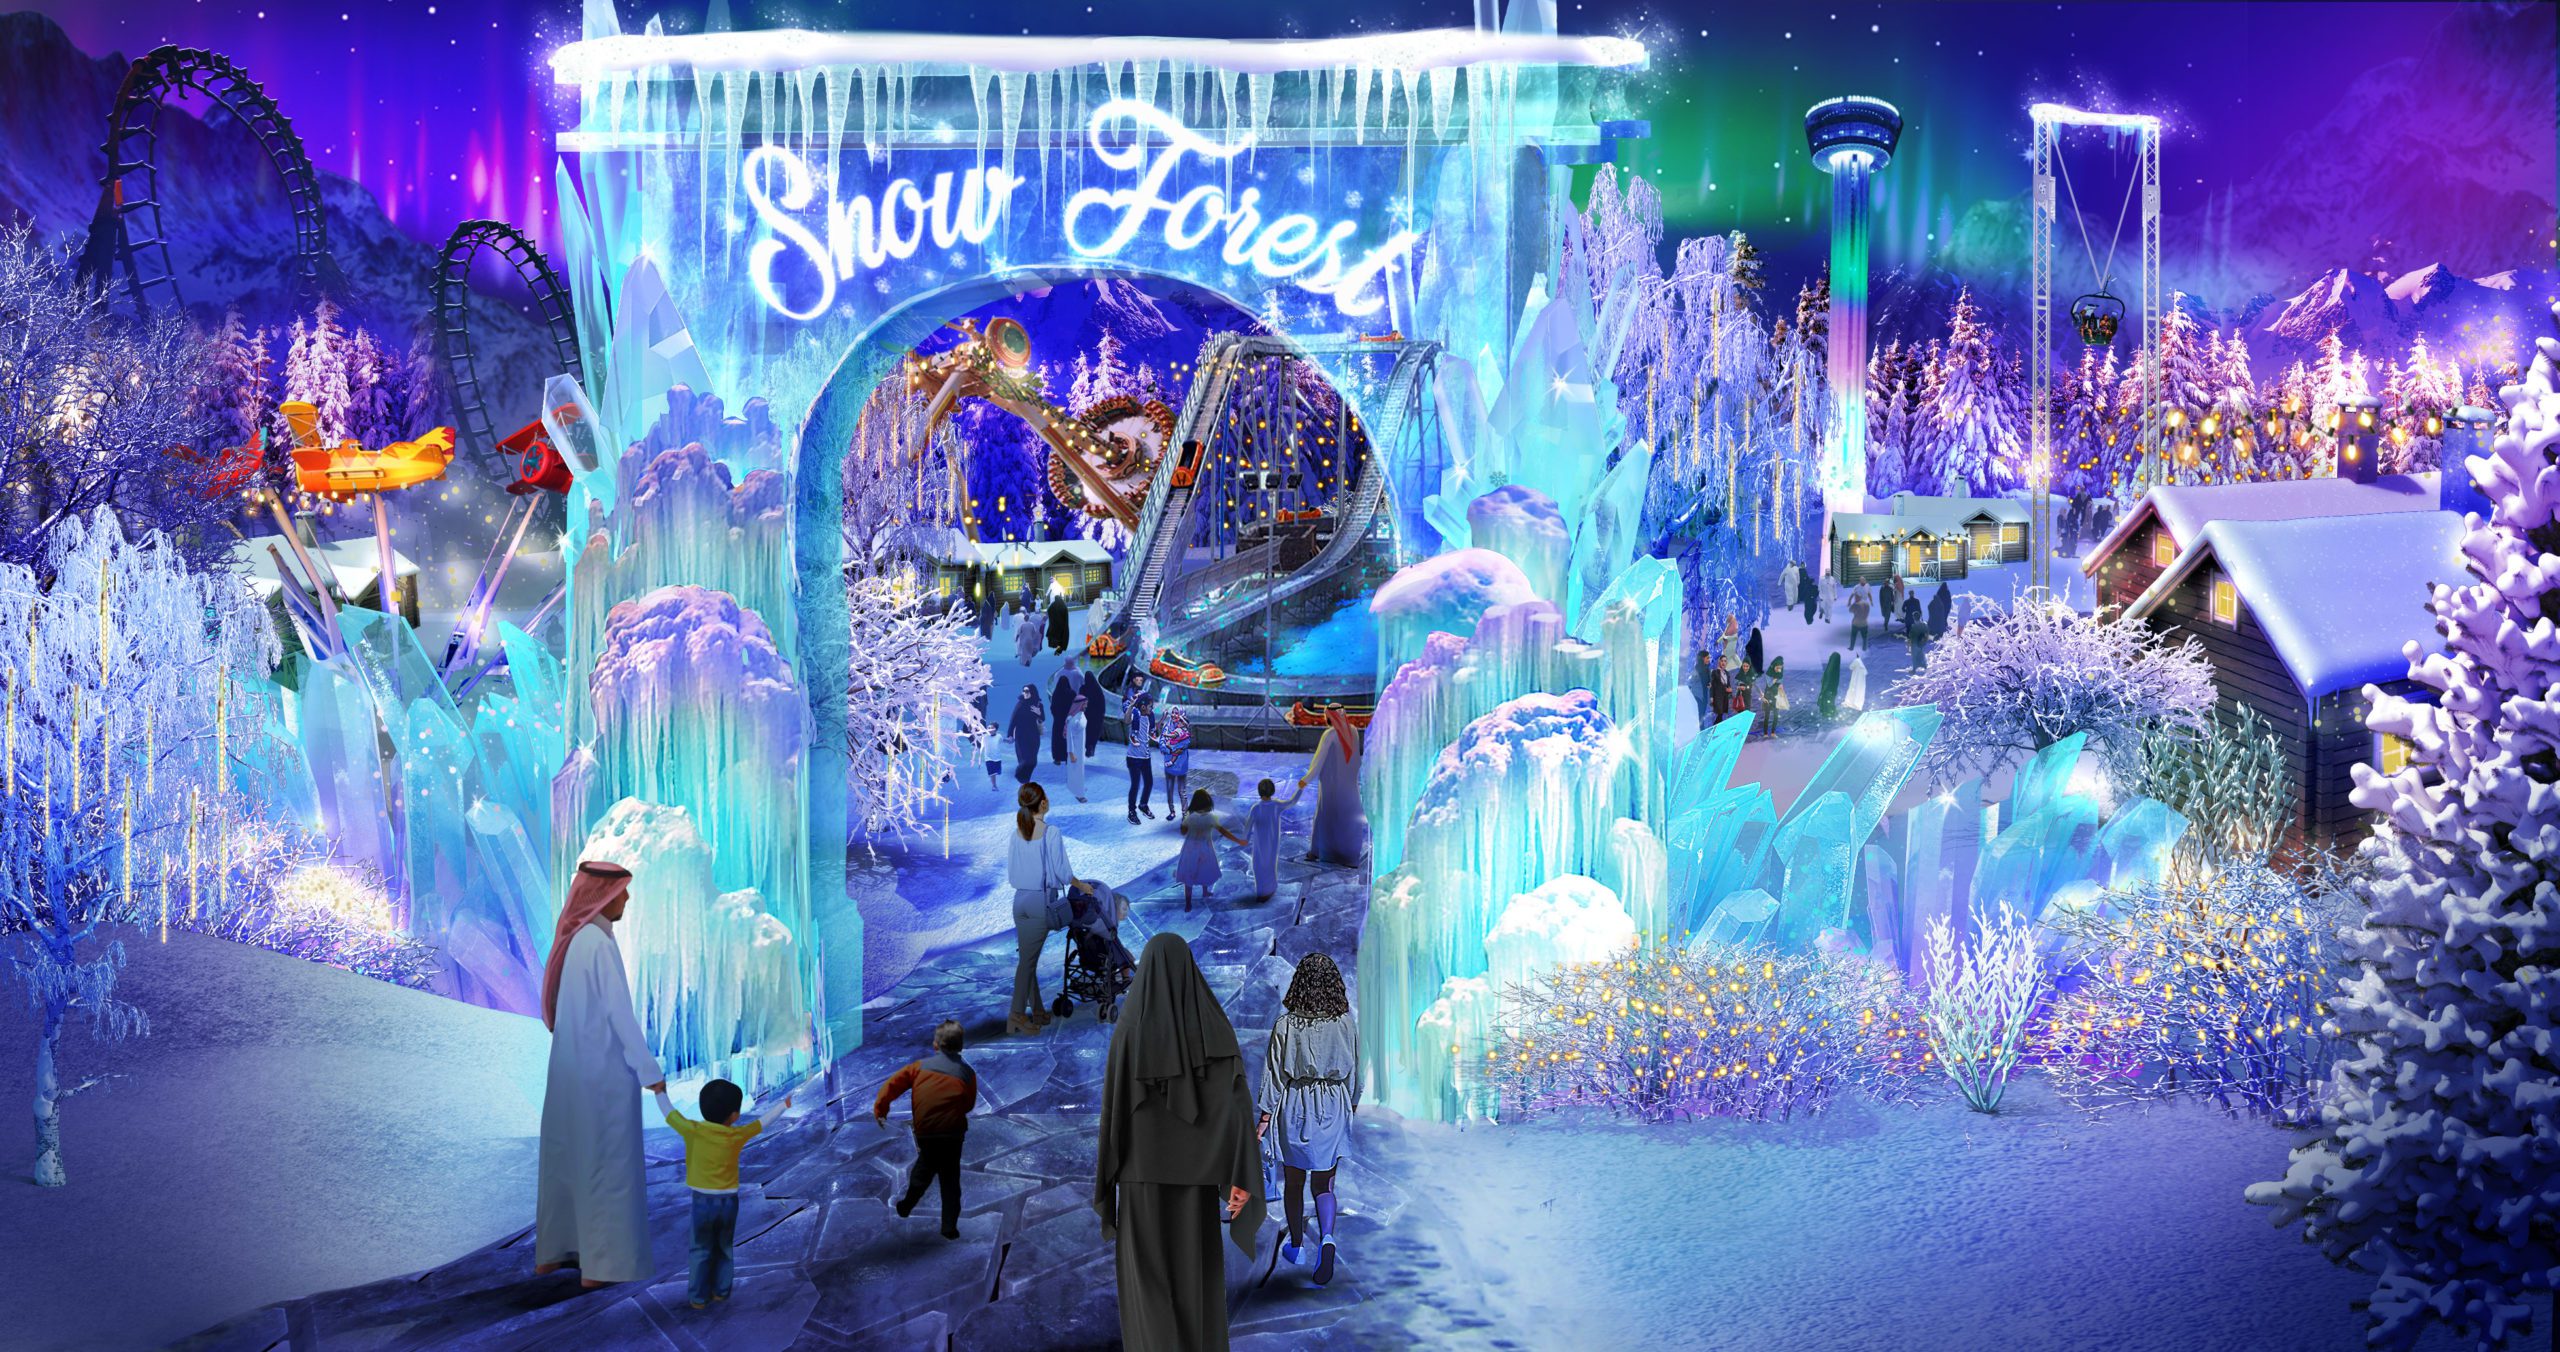 A concept image of the Winter Wonderland Snow Forest which includes mostly blue and white